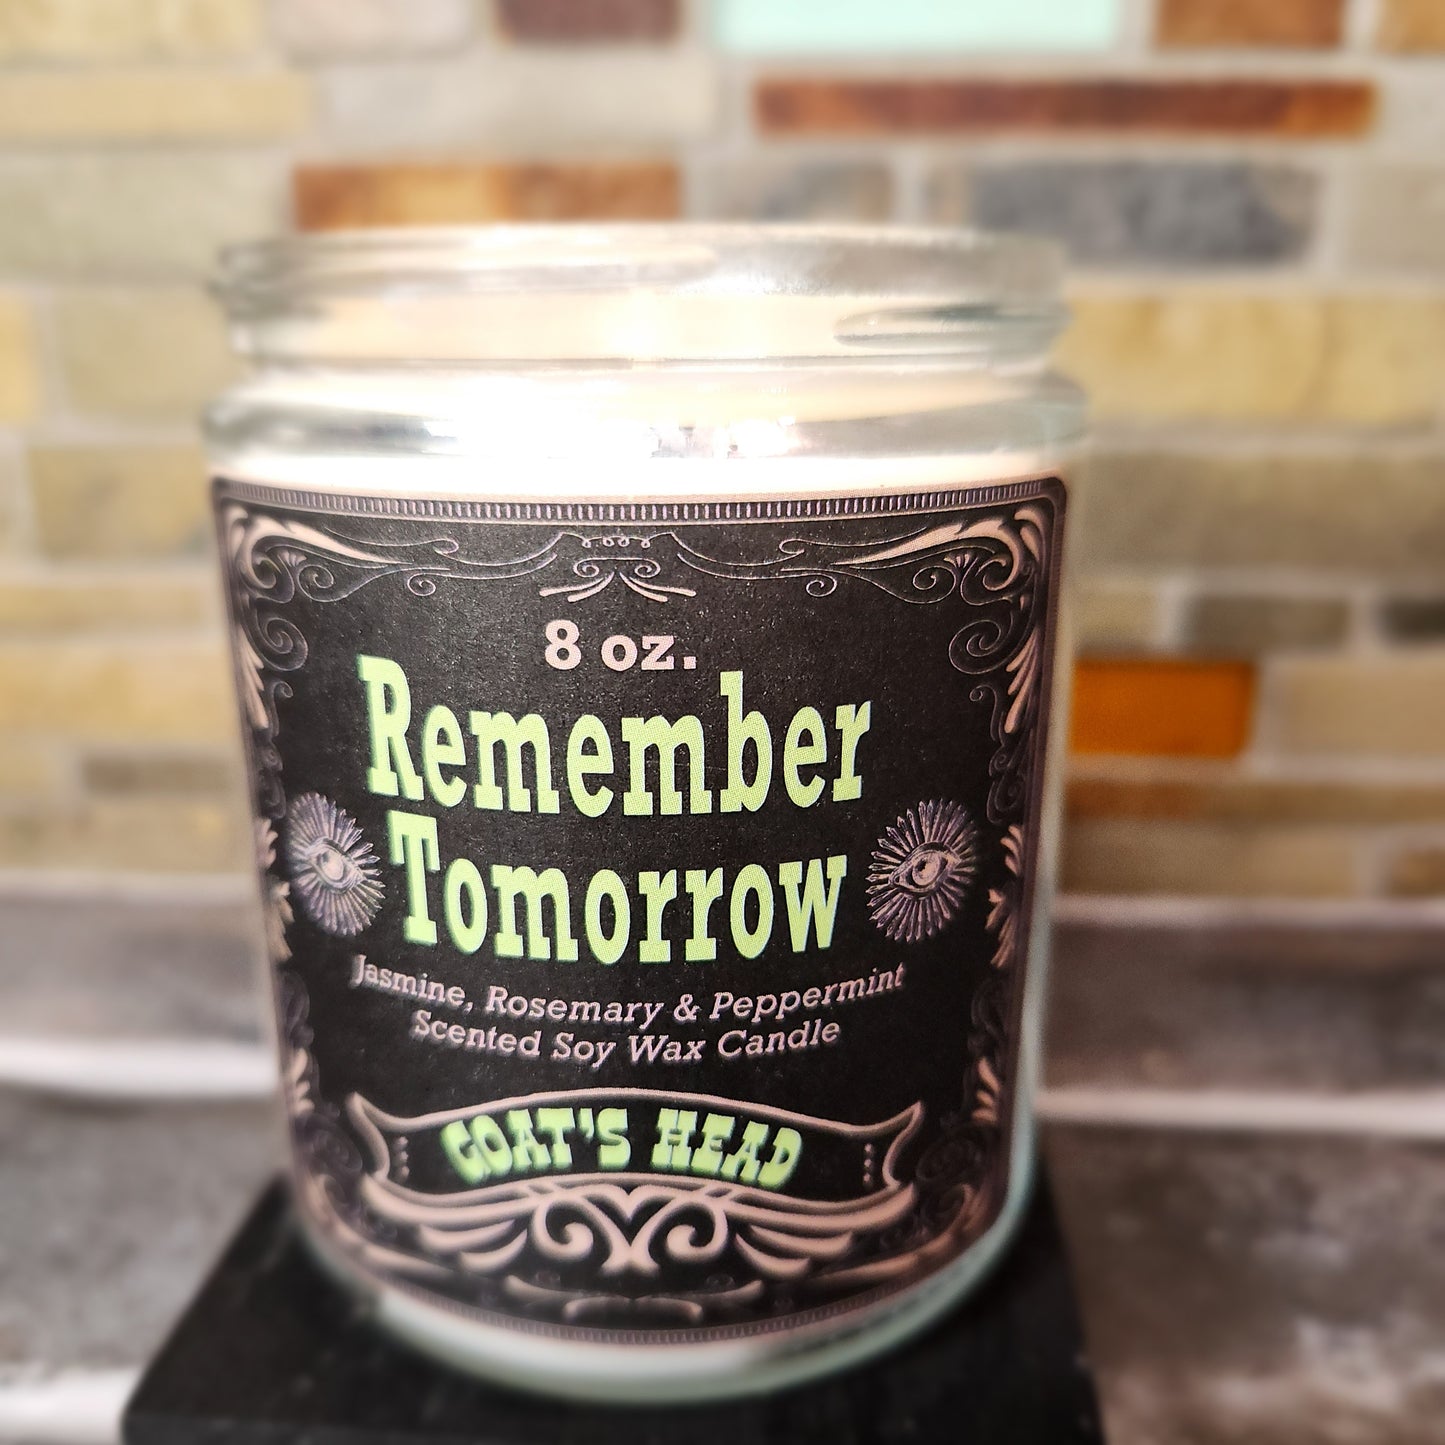 "Remember Tomorrow" 8 oz. Scented Soy Candle